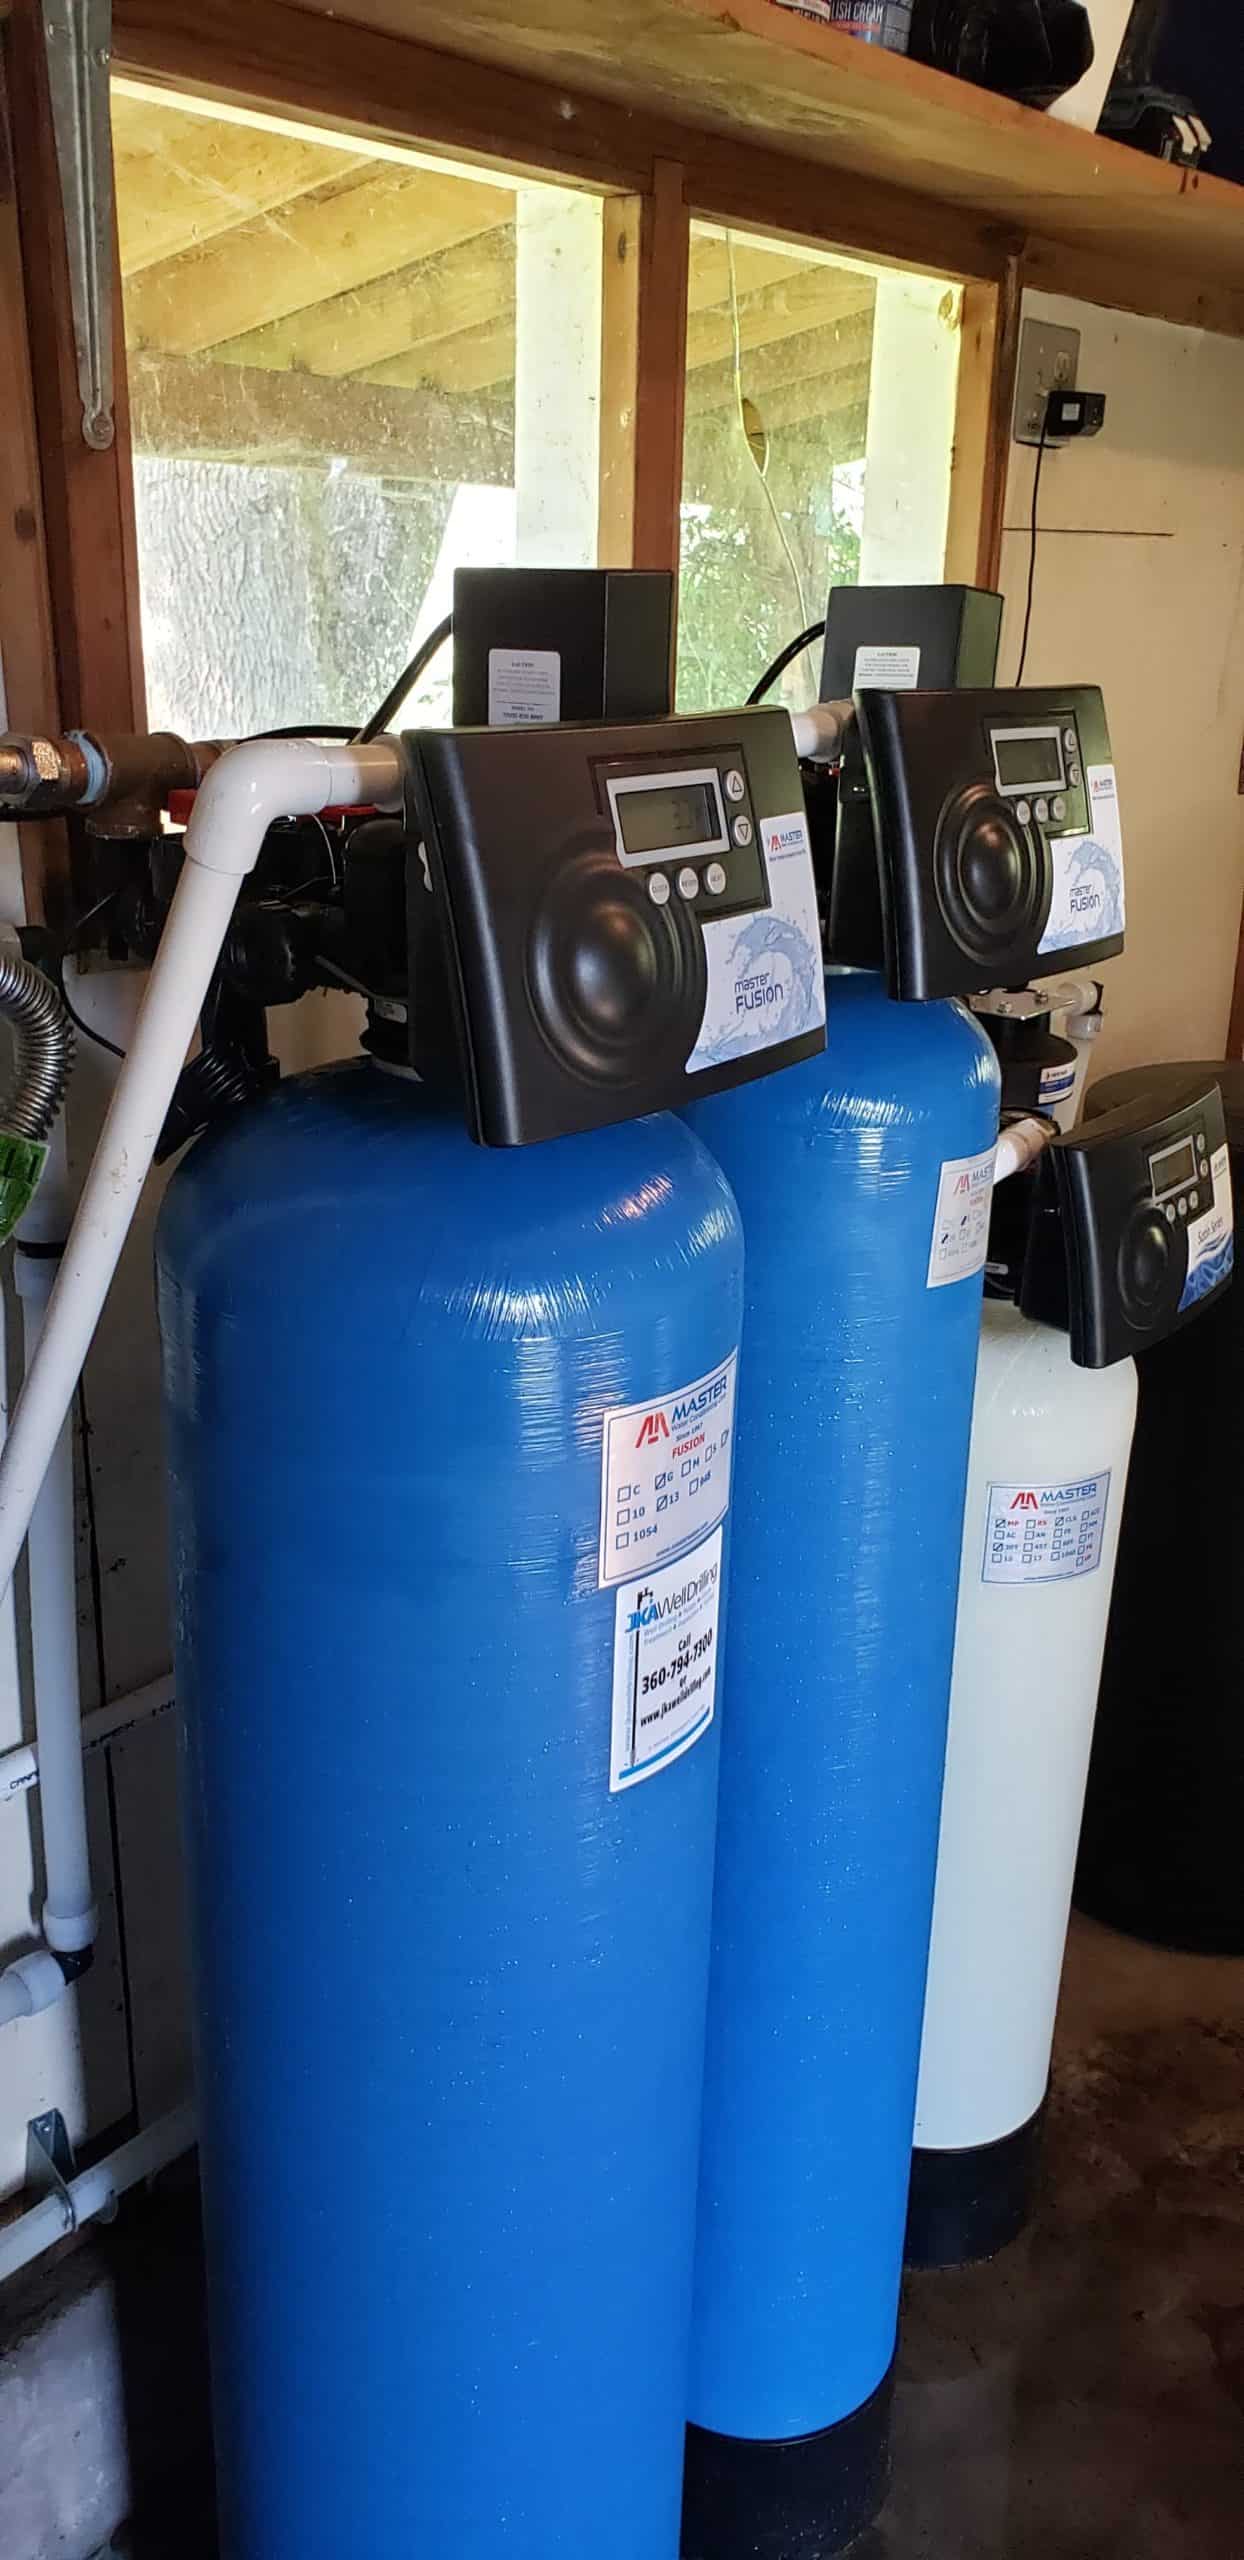 Whole House Backwashing Filtration System with Carbon Media for PFOA's removal